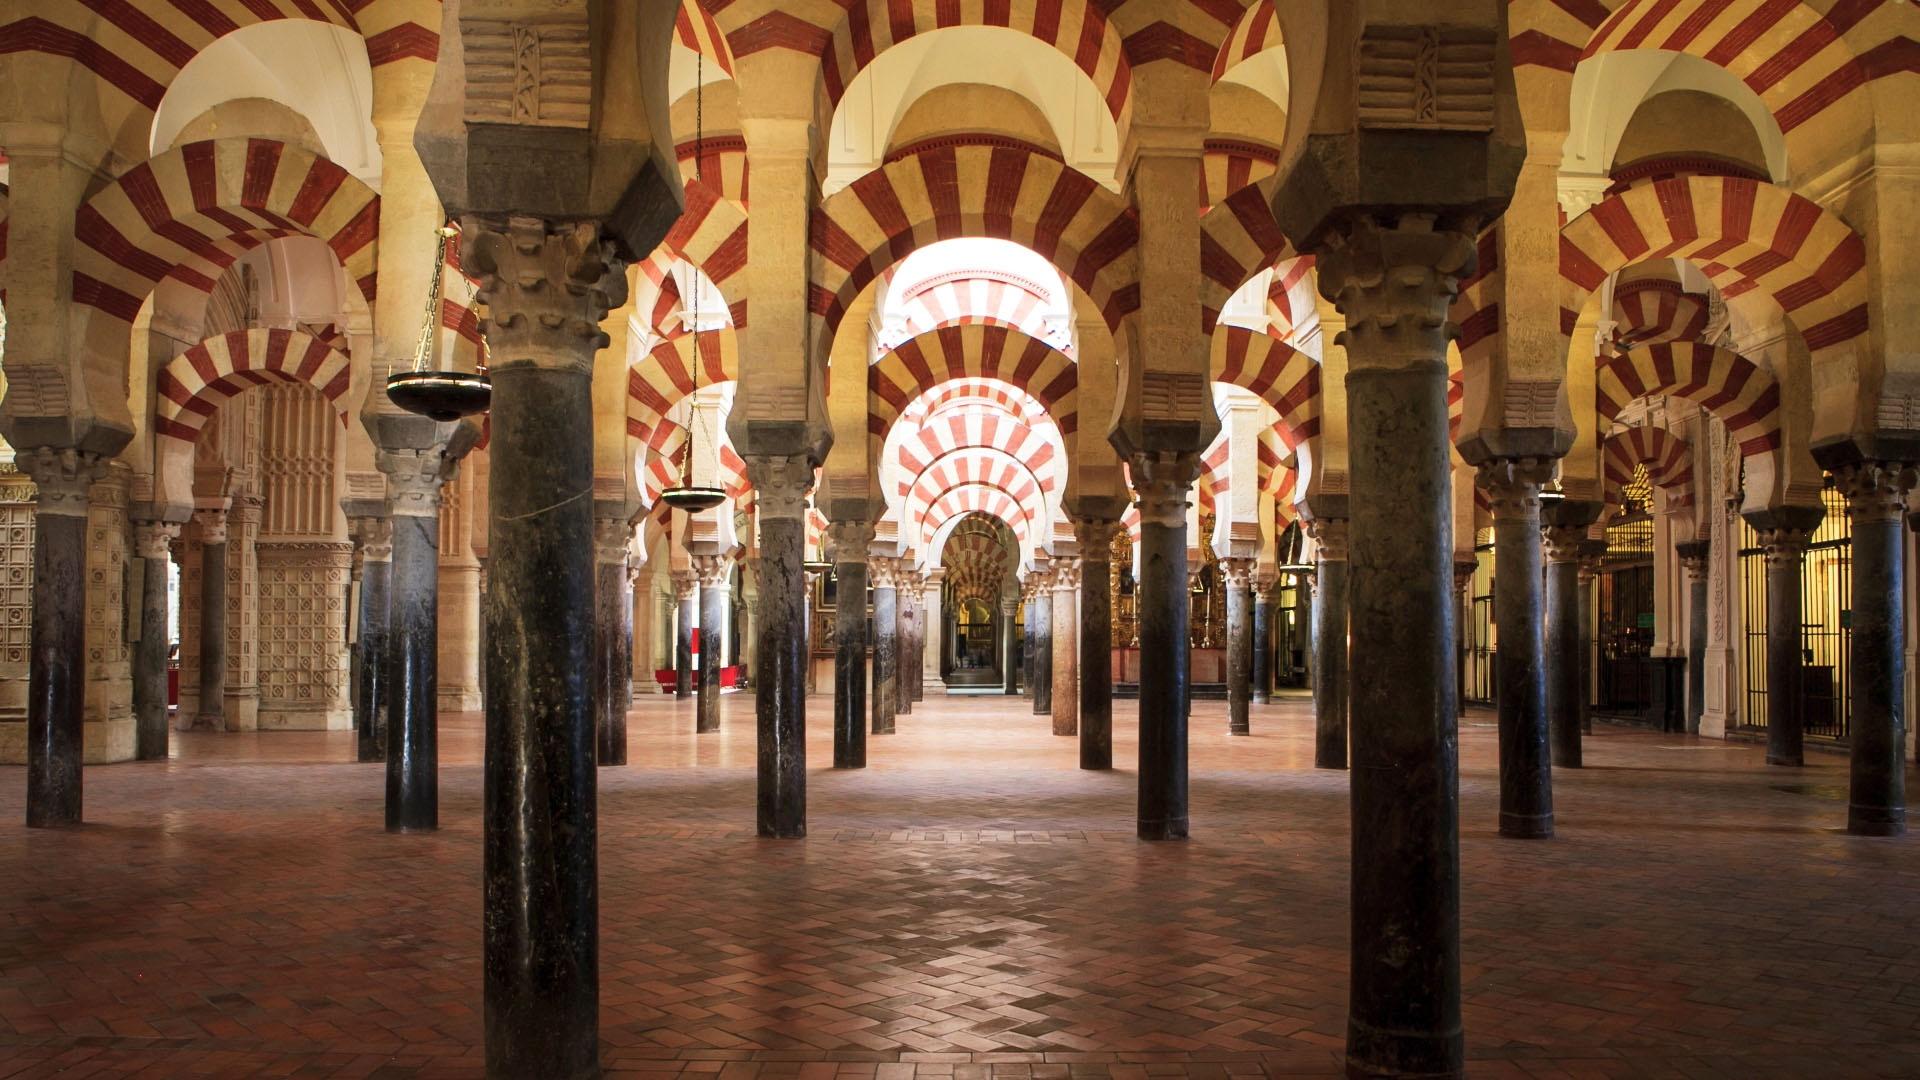 Image of the Great Mosque of Cordoba